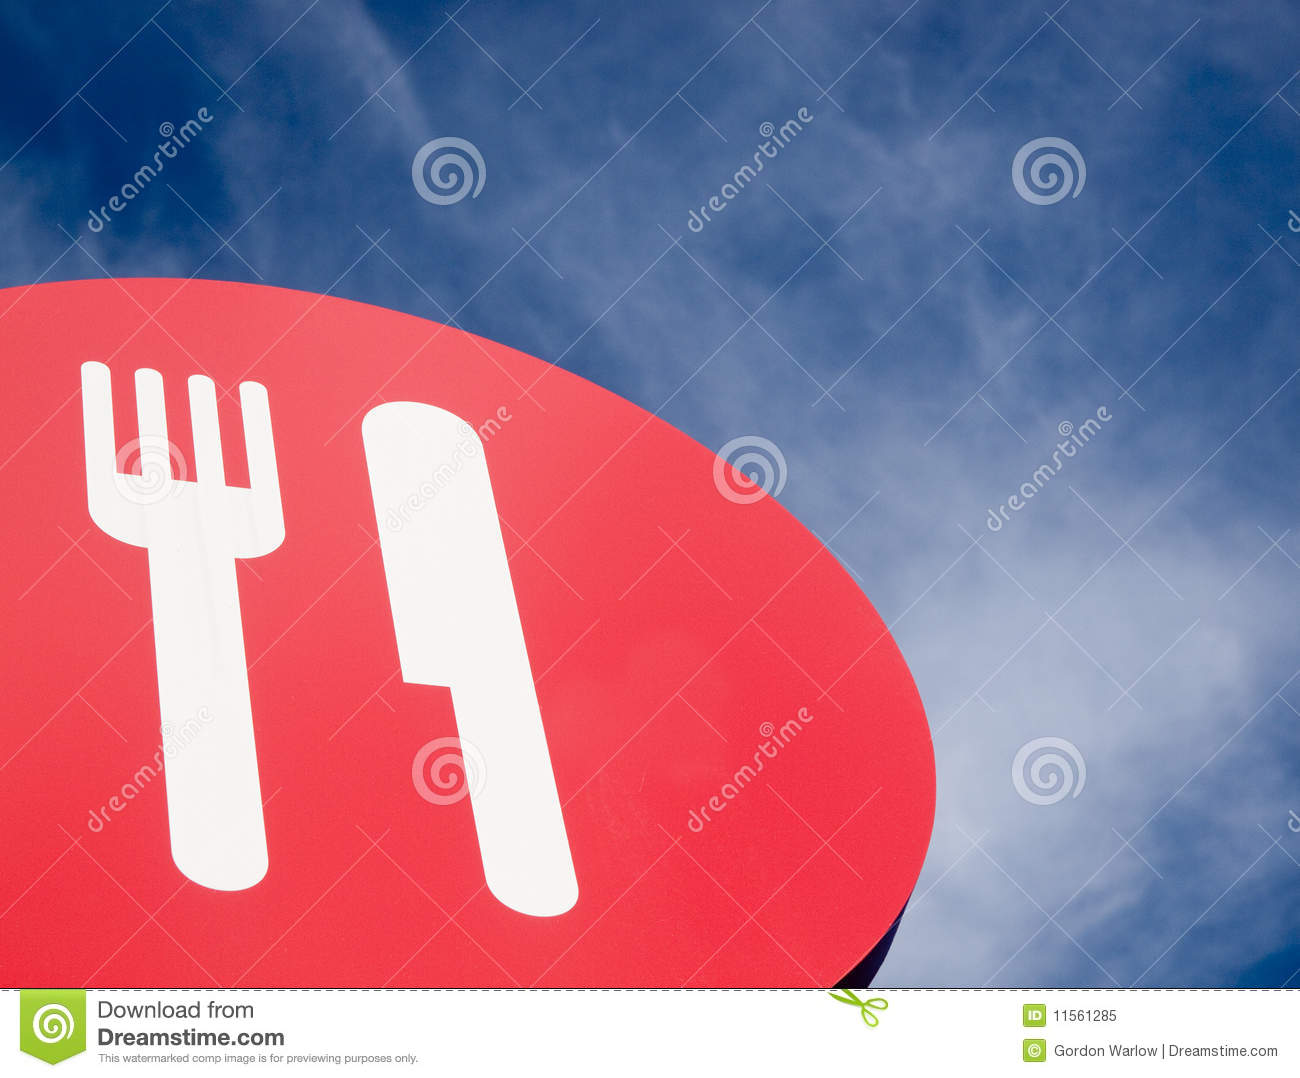 Place To Eat Royalty Free Stock Photo   Image  11561285